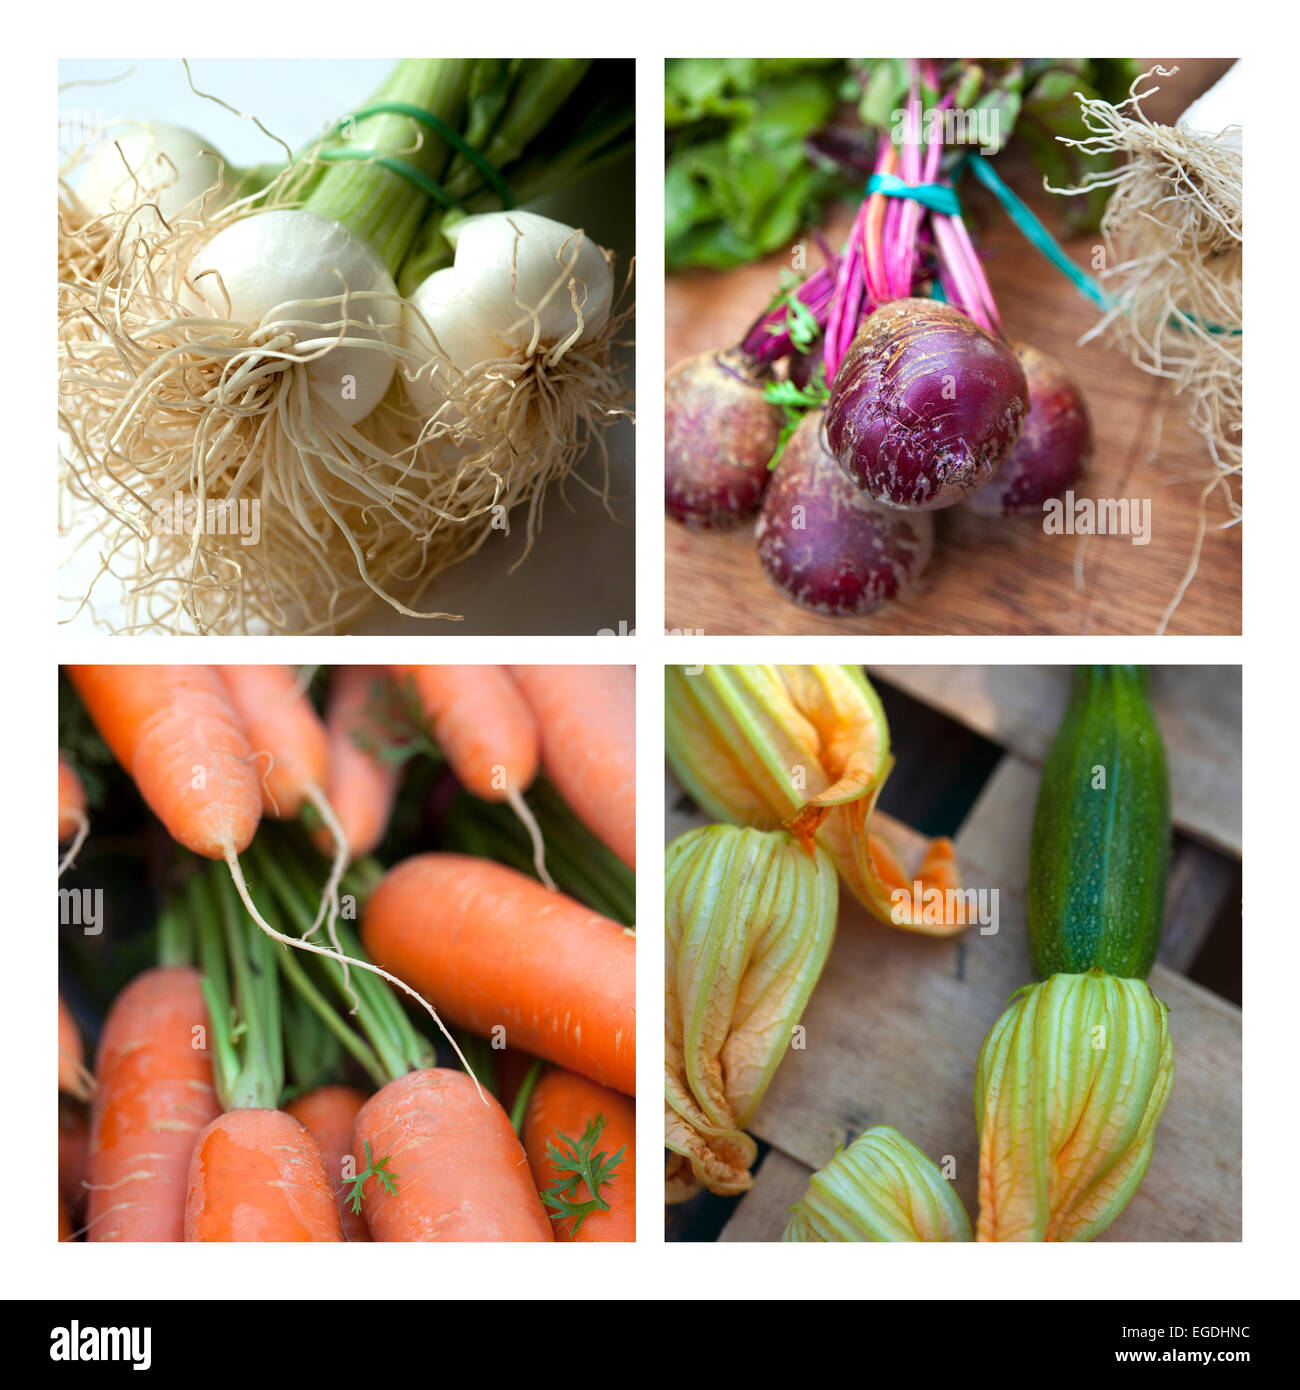 Vegetable and market stall on a collage Stock Photo